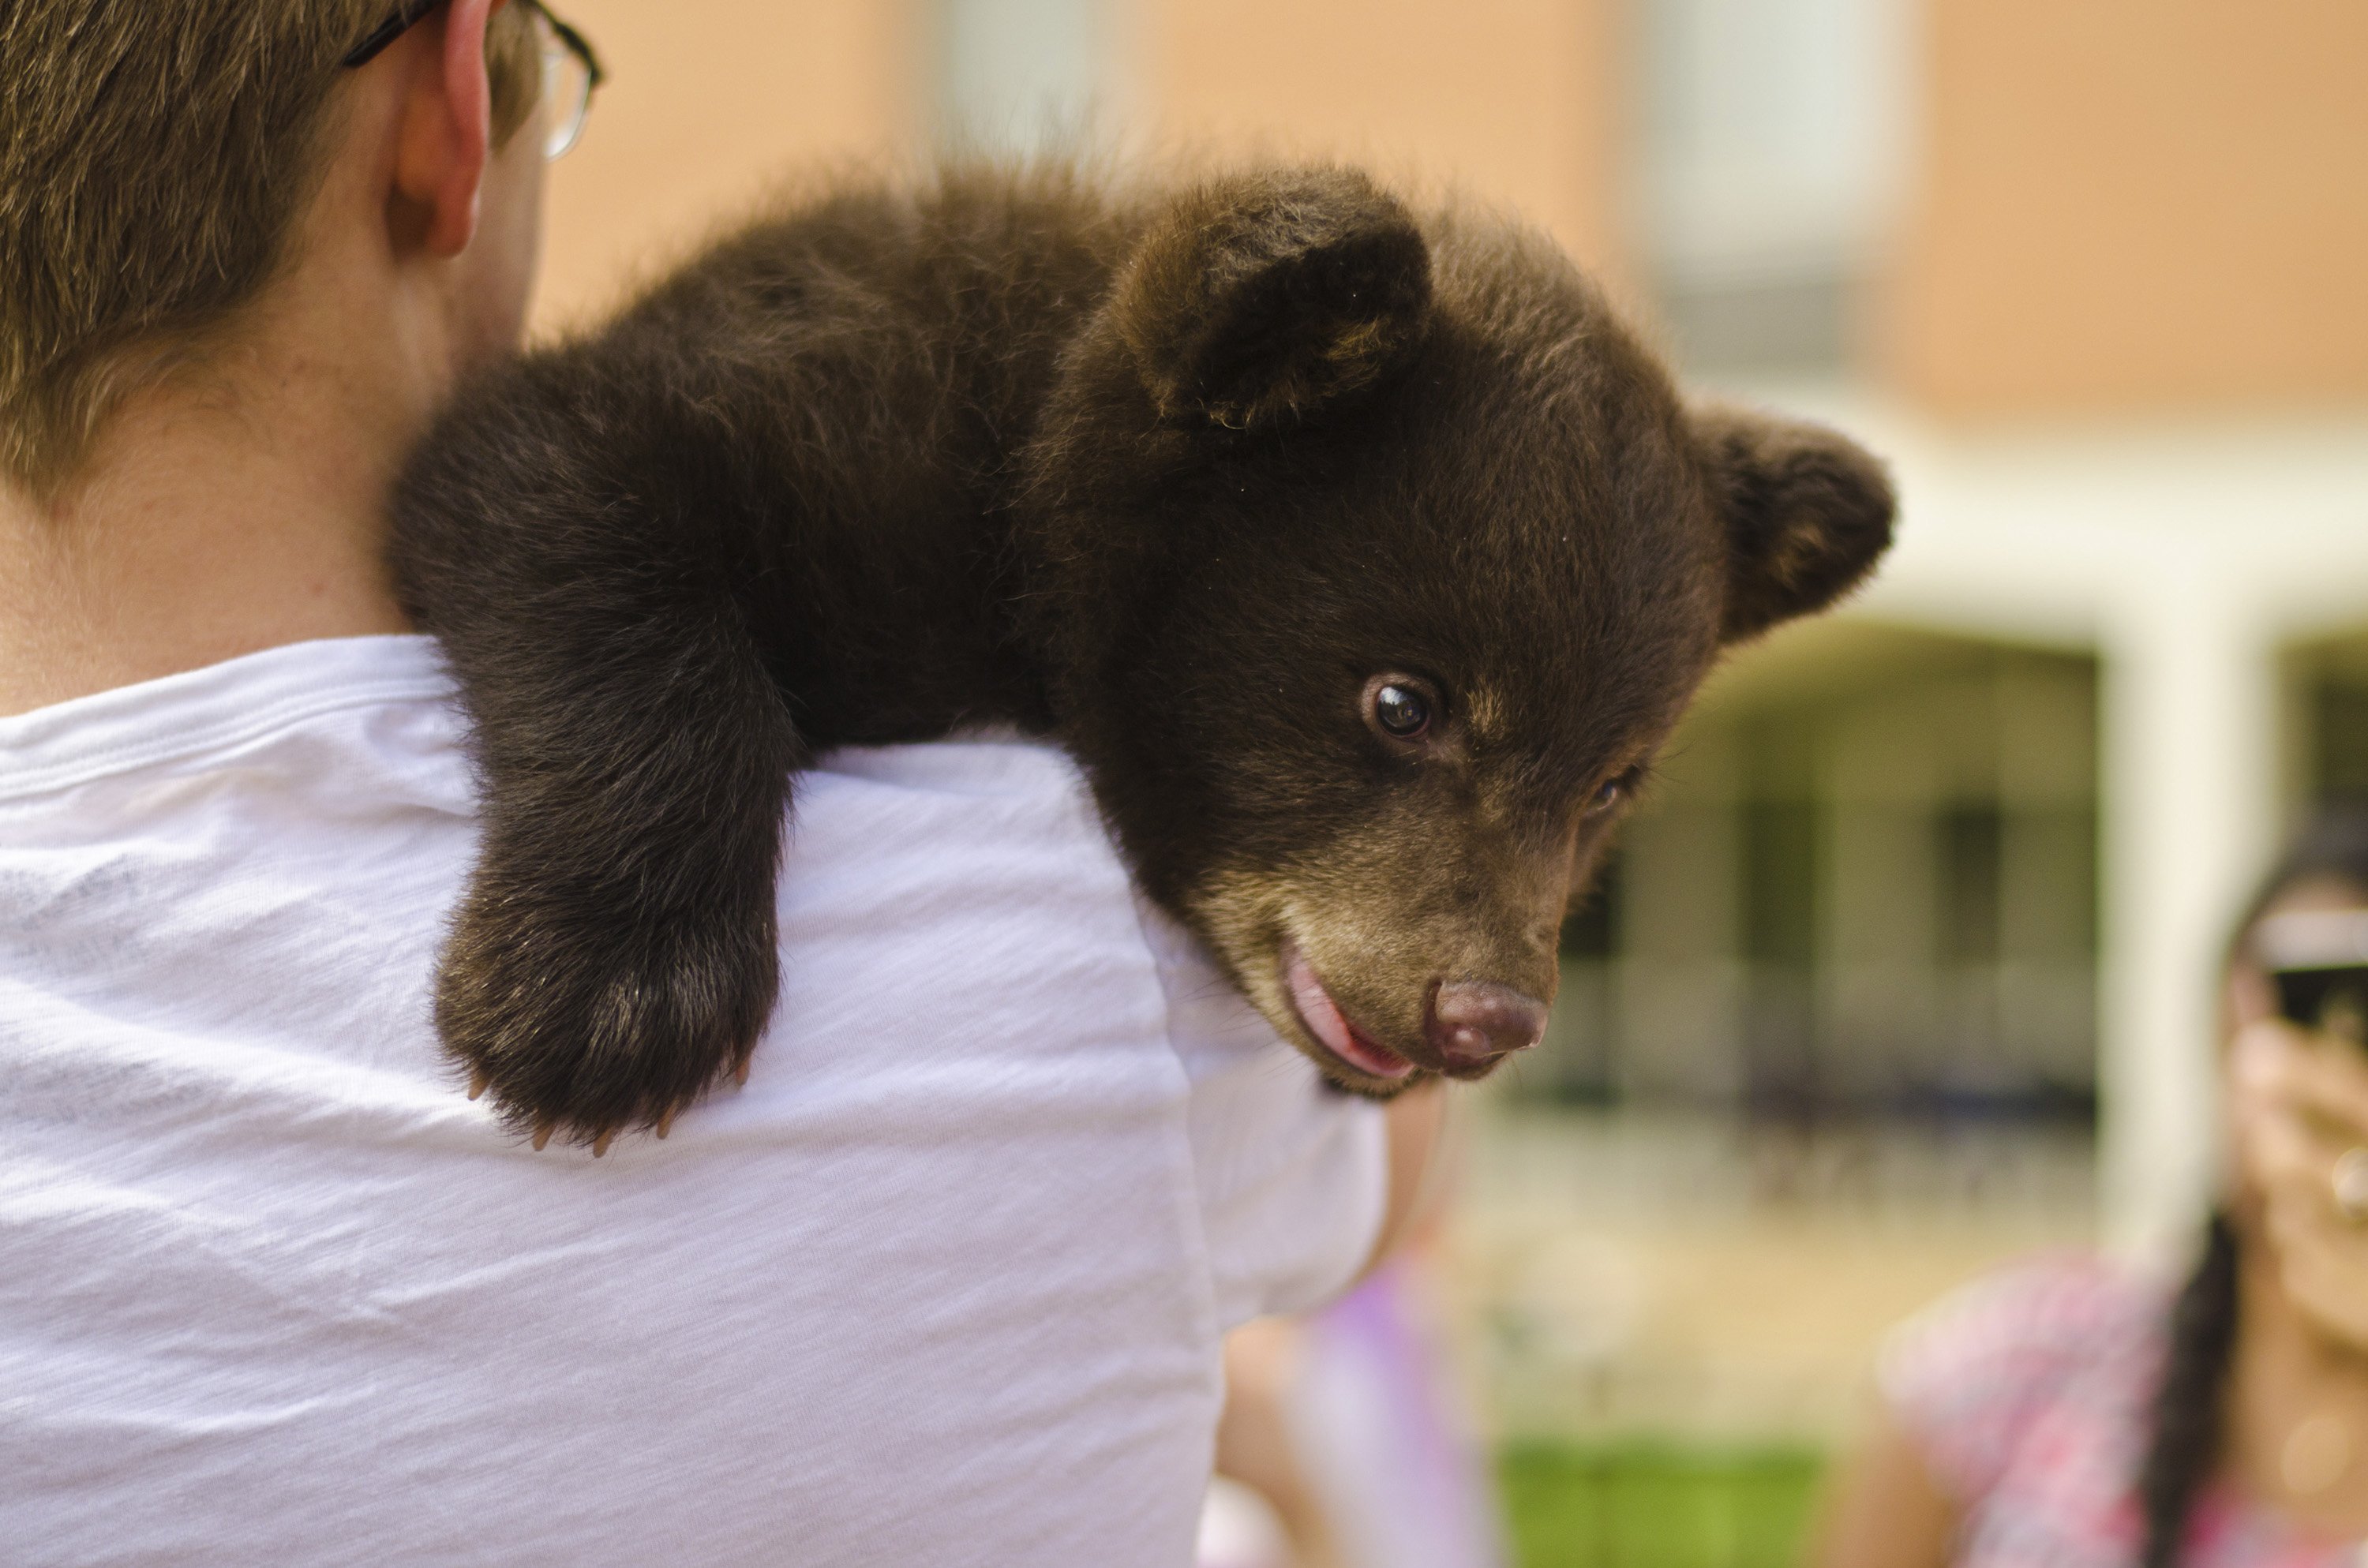 A two-month-old bear cub named Boo Boo is held by a student at Washington University in St. Louis, Missouri in this handout picture taken April 26, 2014. (Mary Gail Richardson—Reuters)